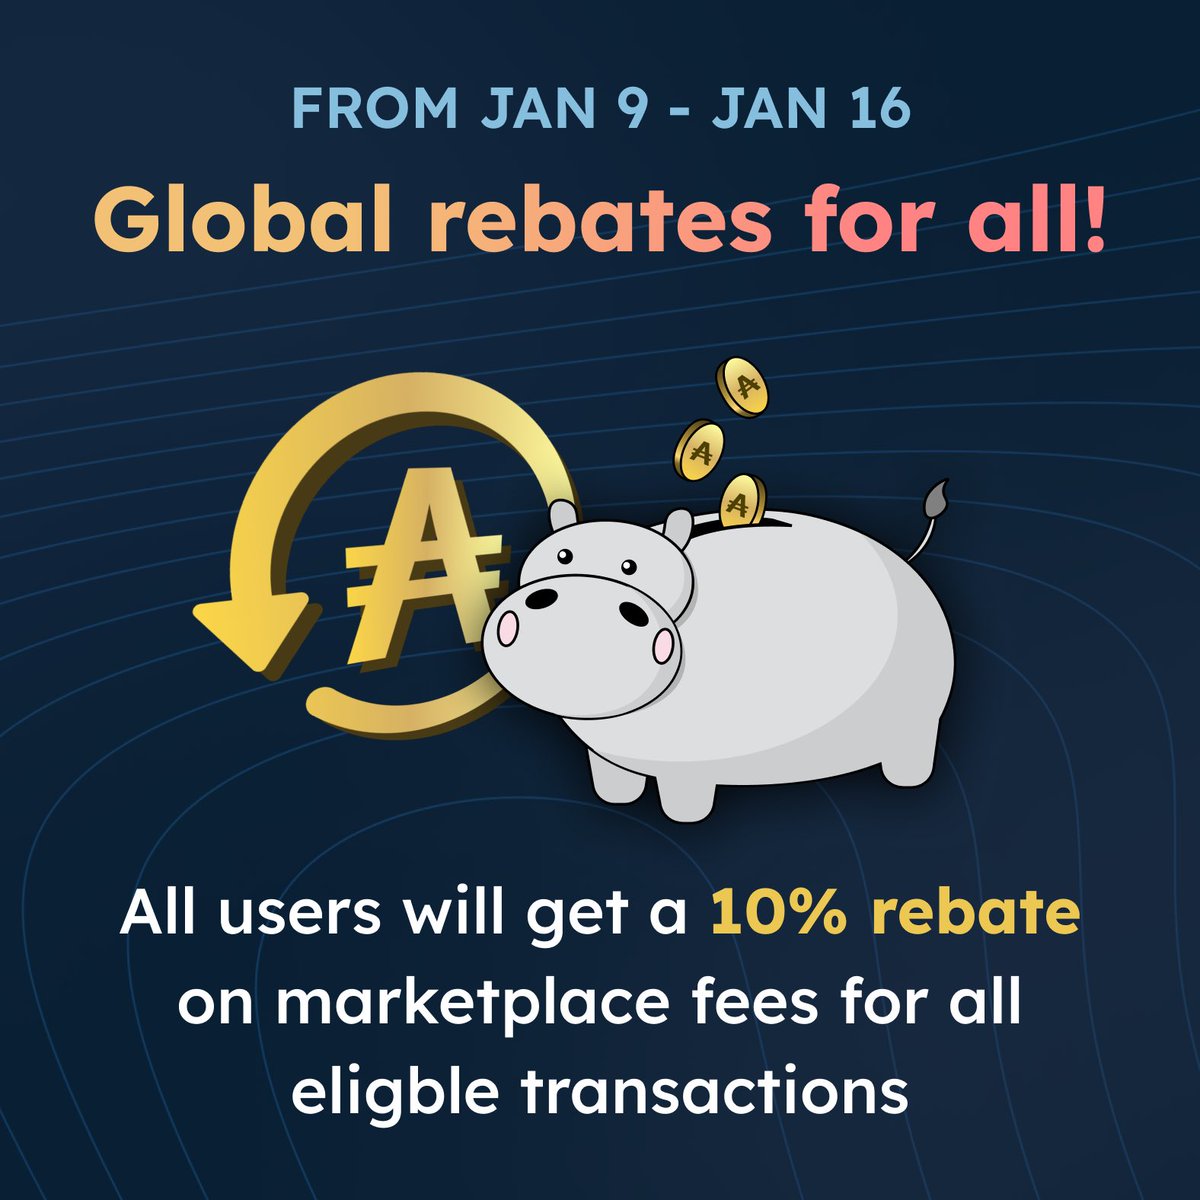 🆕 Exclusive Offer: Slash Your Trading Costs! 🔪 For the remainder of S2, users will receive a 10% rebate on their purchases and accepted offers, regardless of their $JPG holdings. Make the most out of your trading activity before the end of S2 rebate tiers! ✅